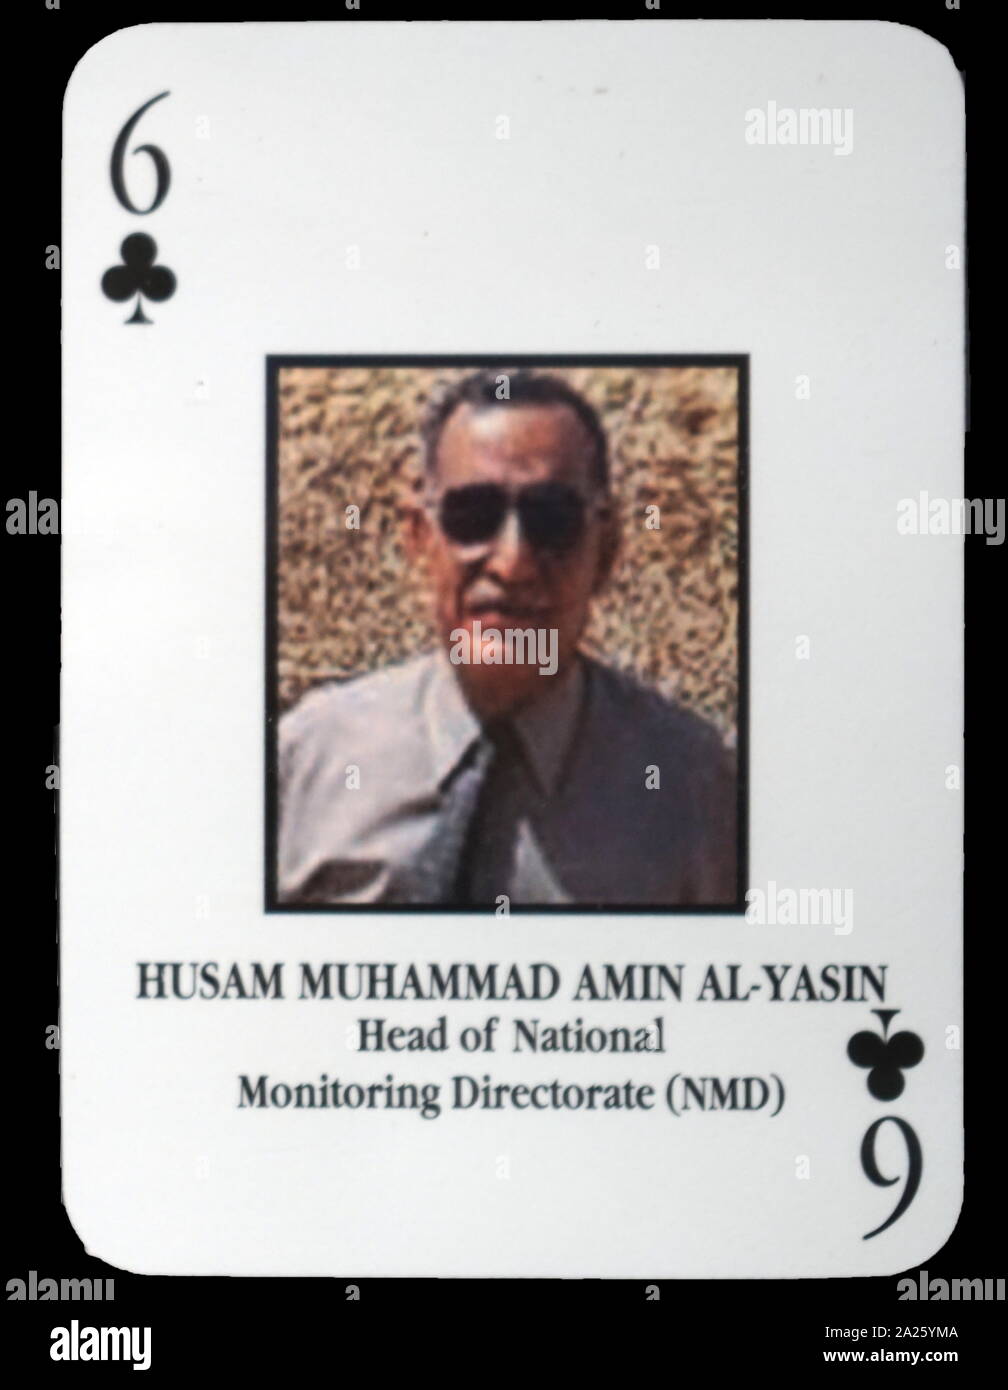 Most-wanted Iraqi playing cards - Husam Muhammad Amin Al-Yasin (Head of National Monitoring Directorate (NMD). The U.S. military developed a set of playing cards to help troop identify the most-wanted members of President Saddam Hussein's government during the 2003 invasion of Iraq. Stock Photo